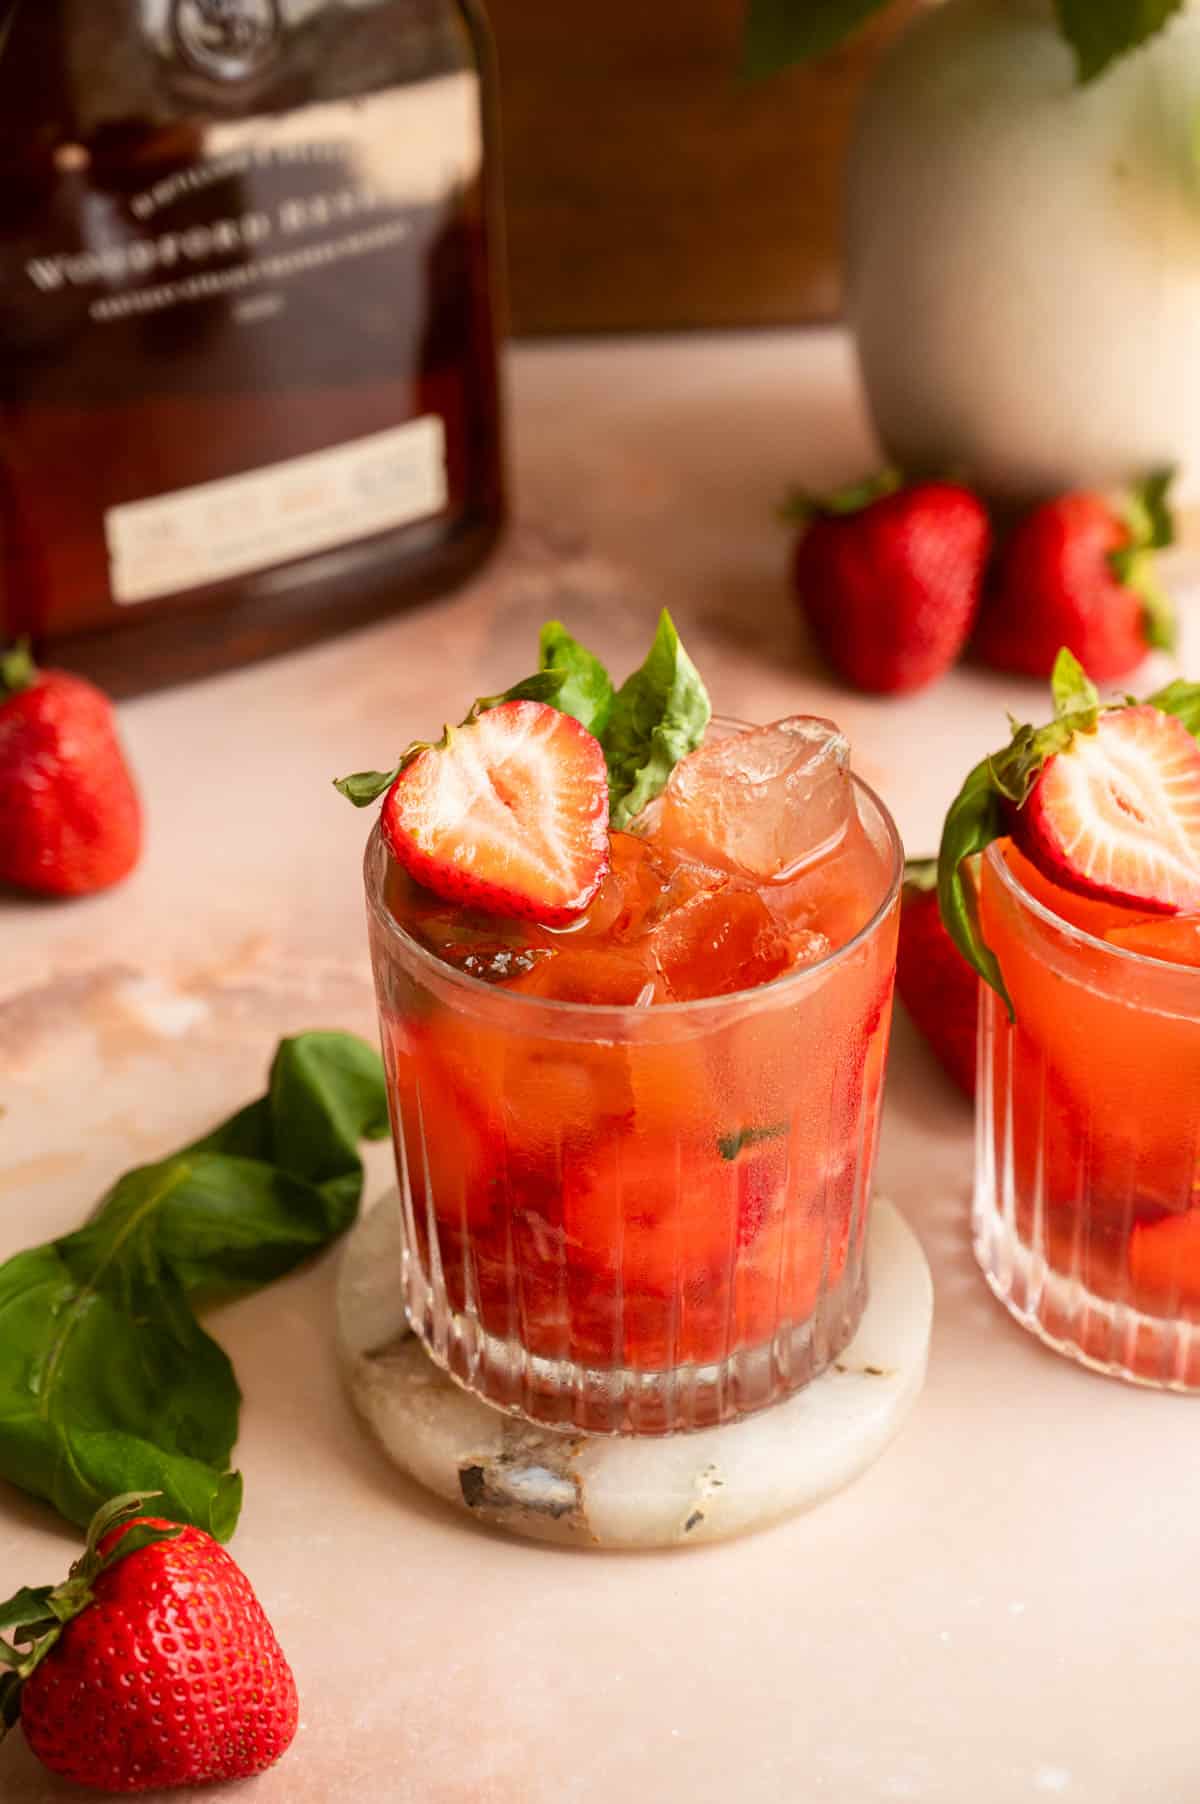 the finished cocktail garnished with ½ strawberry and basil.